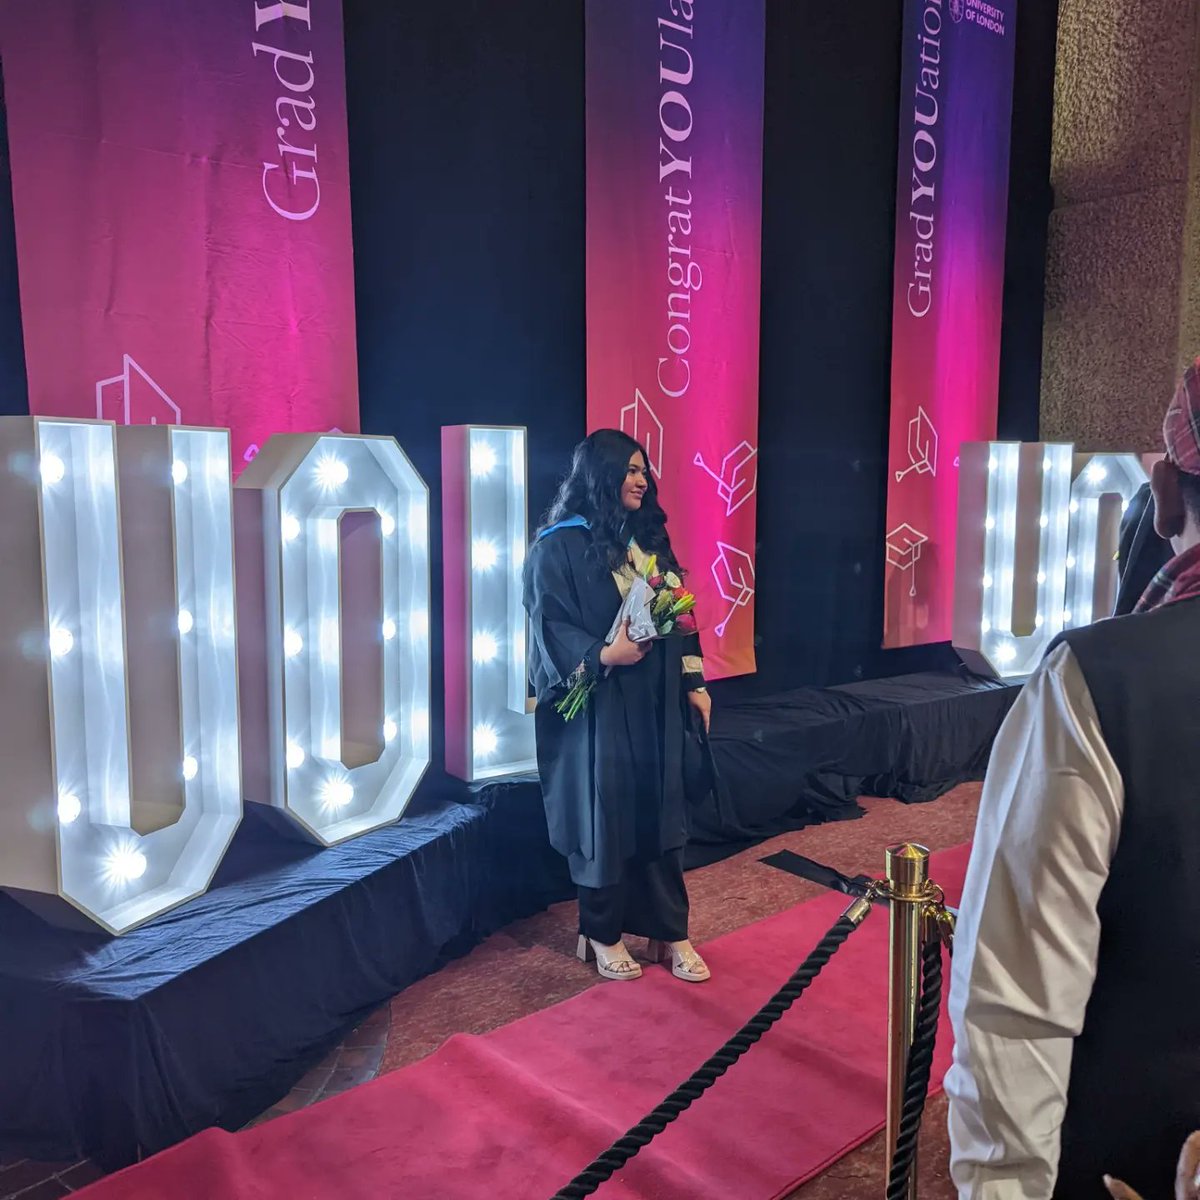 Day two at #UoLGrad2024 🎓 Pictures paint a thousand words, so we've uploaded a carousel of photos for you to enjoy 😍 Thanks so much to @barbicancentre for being amazing hosts. Most importantly, well done to our new graduates, we hope you've had a special day to remember ❤️